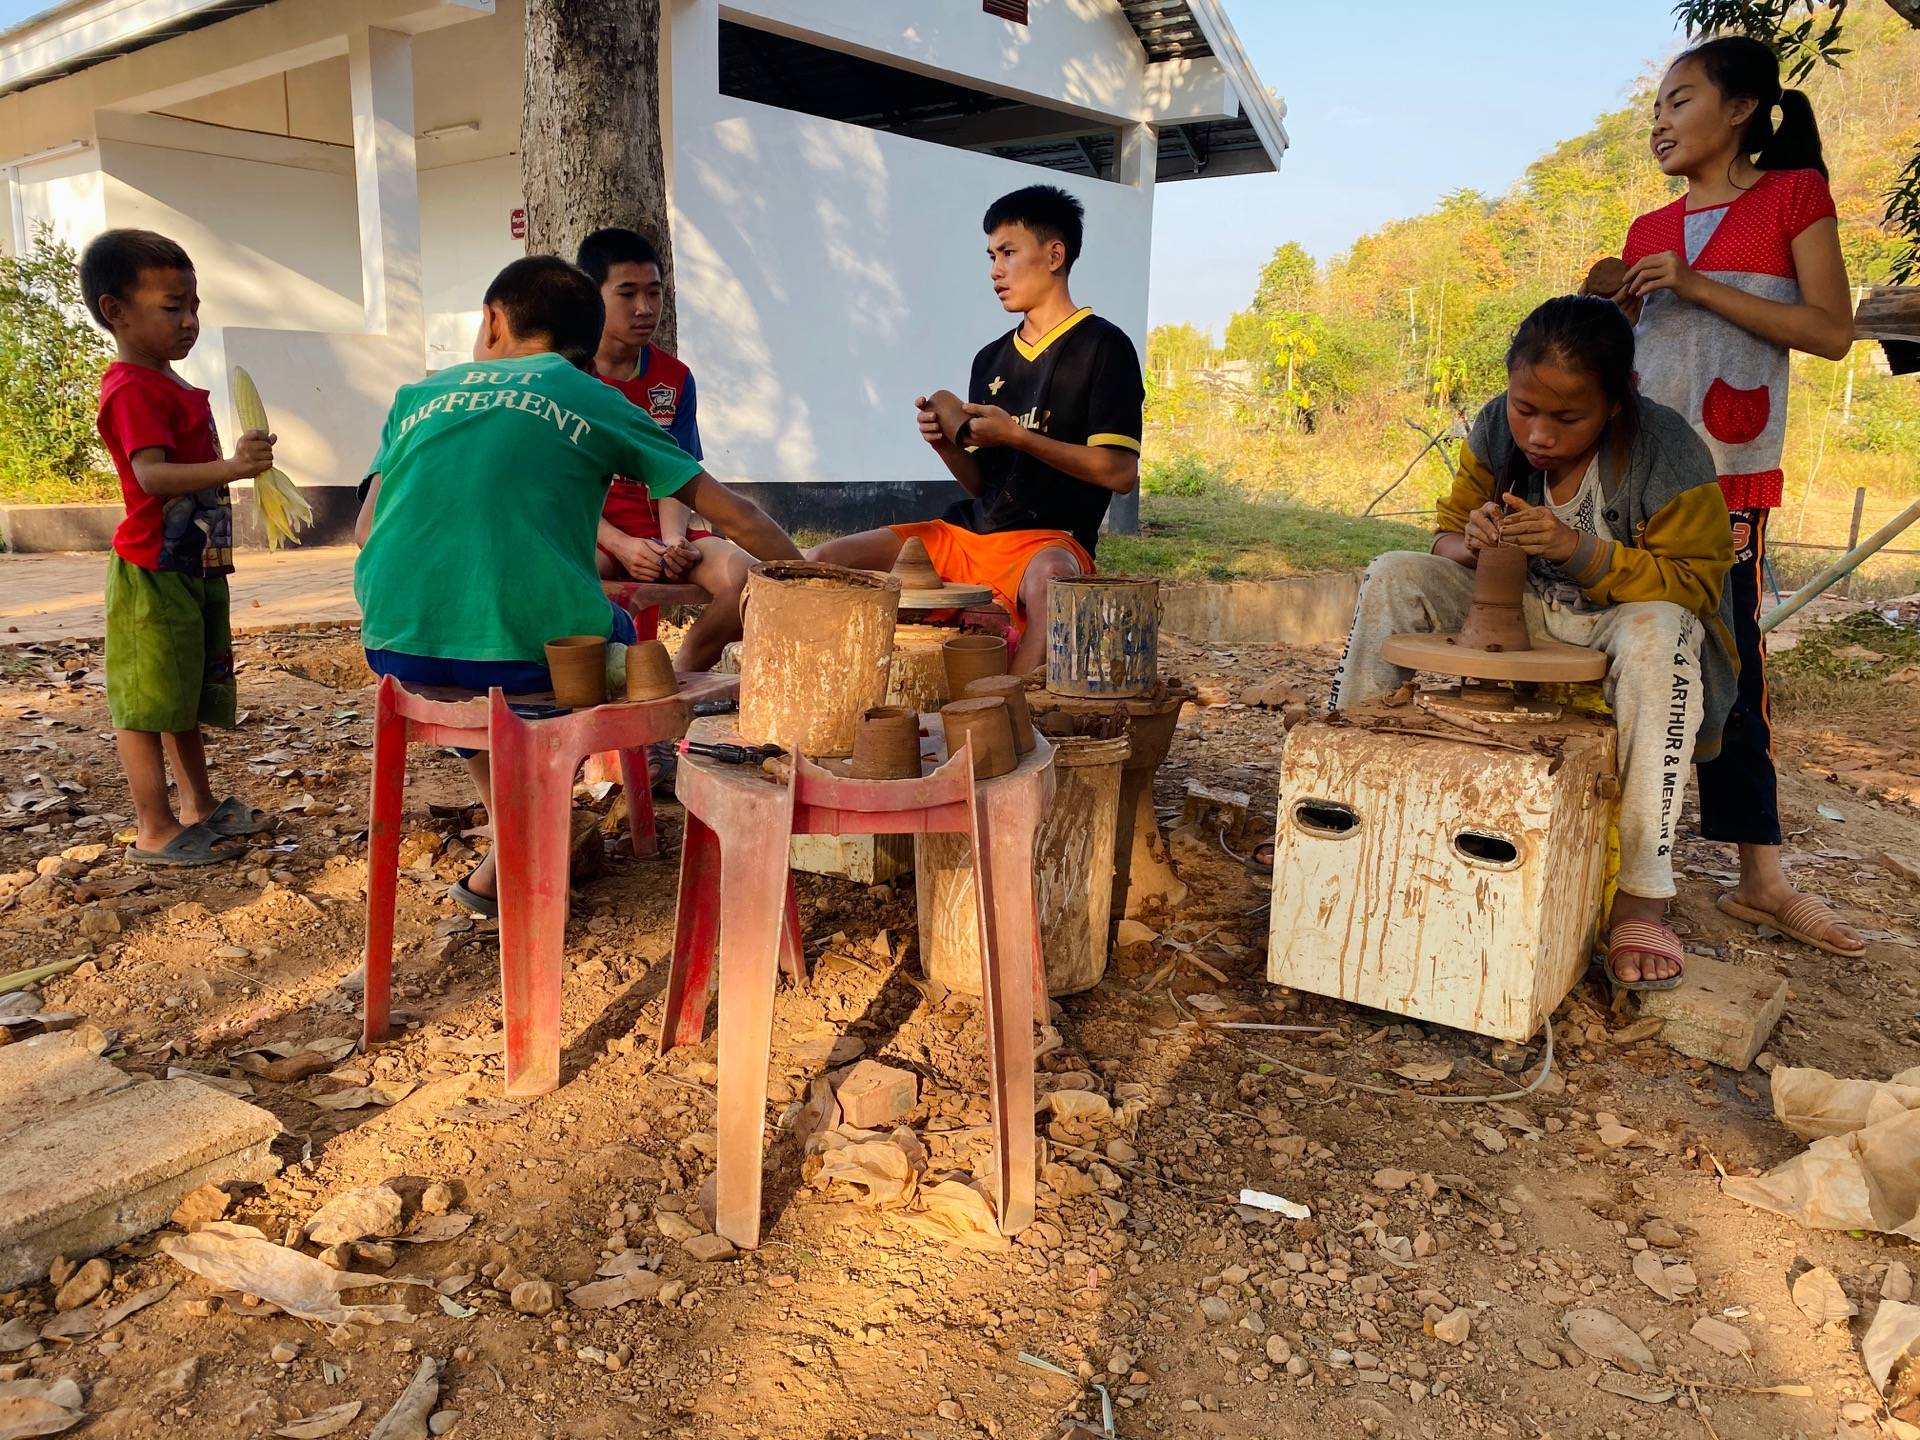 Local children and teenagers making pottery. Unfortunately, we couldn't ask them if they lived there, worked there or if they were just there for a pottery class. 